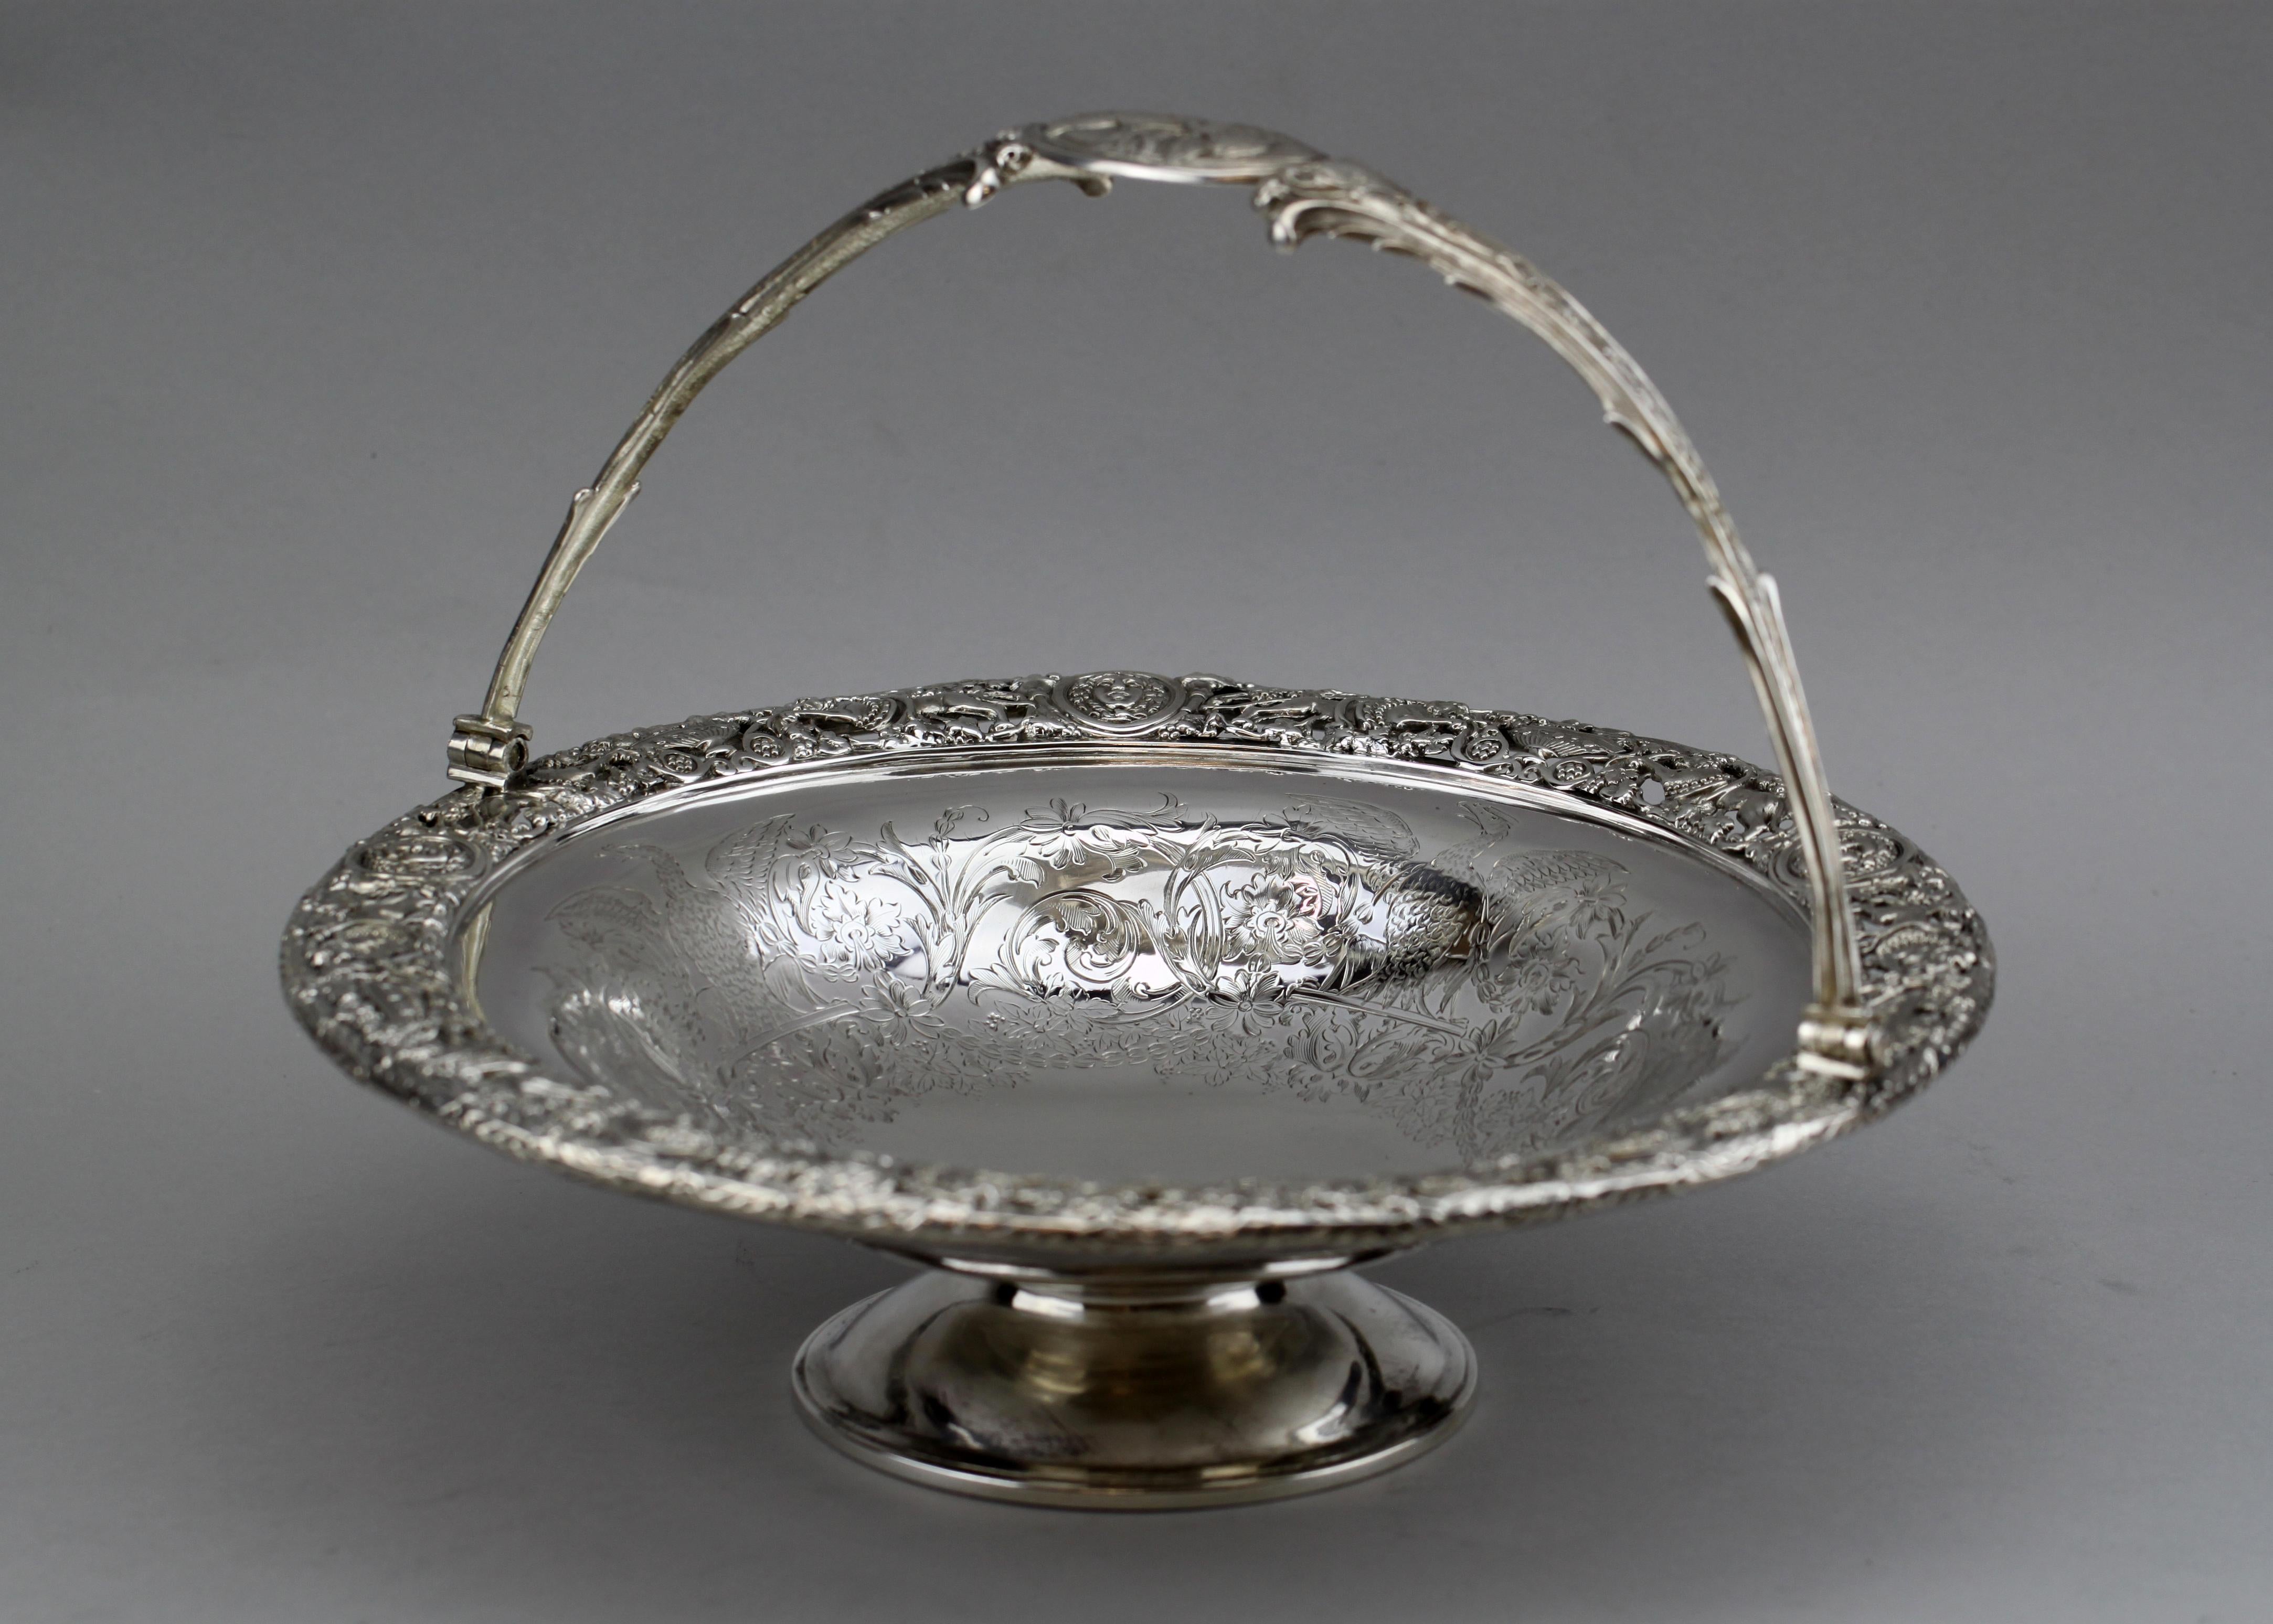 Antique Victorian Cellini style impressive fruit bowl with handle

Maker: Stephen Smith

Made in London, circa 1873

Fully hallmarked.

Dimensions:
Size diameter/height 27.7 x 7.7 cm
With handle height 20.5 cm

Weight 832